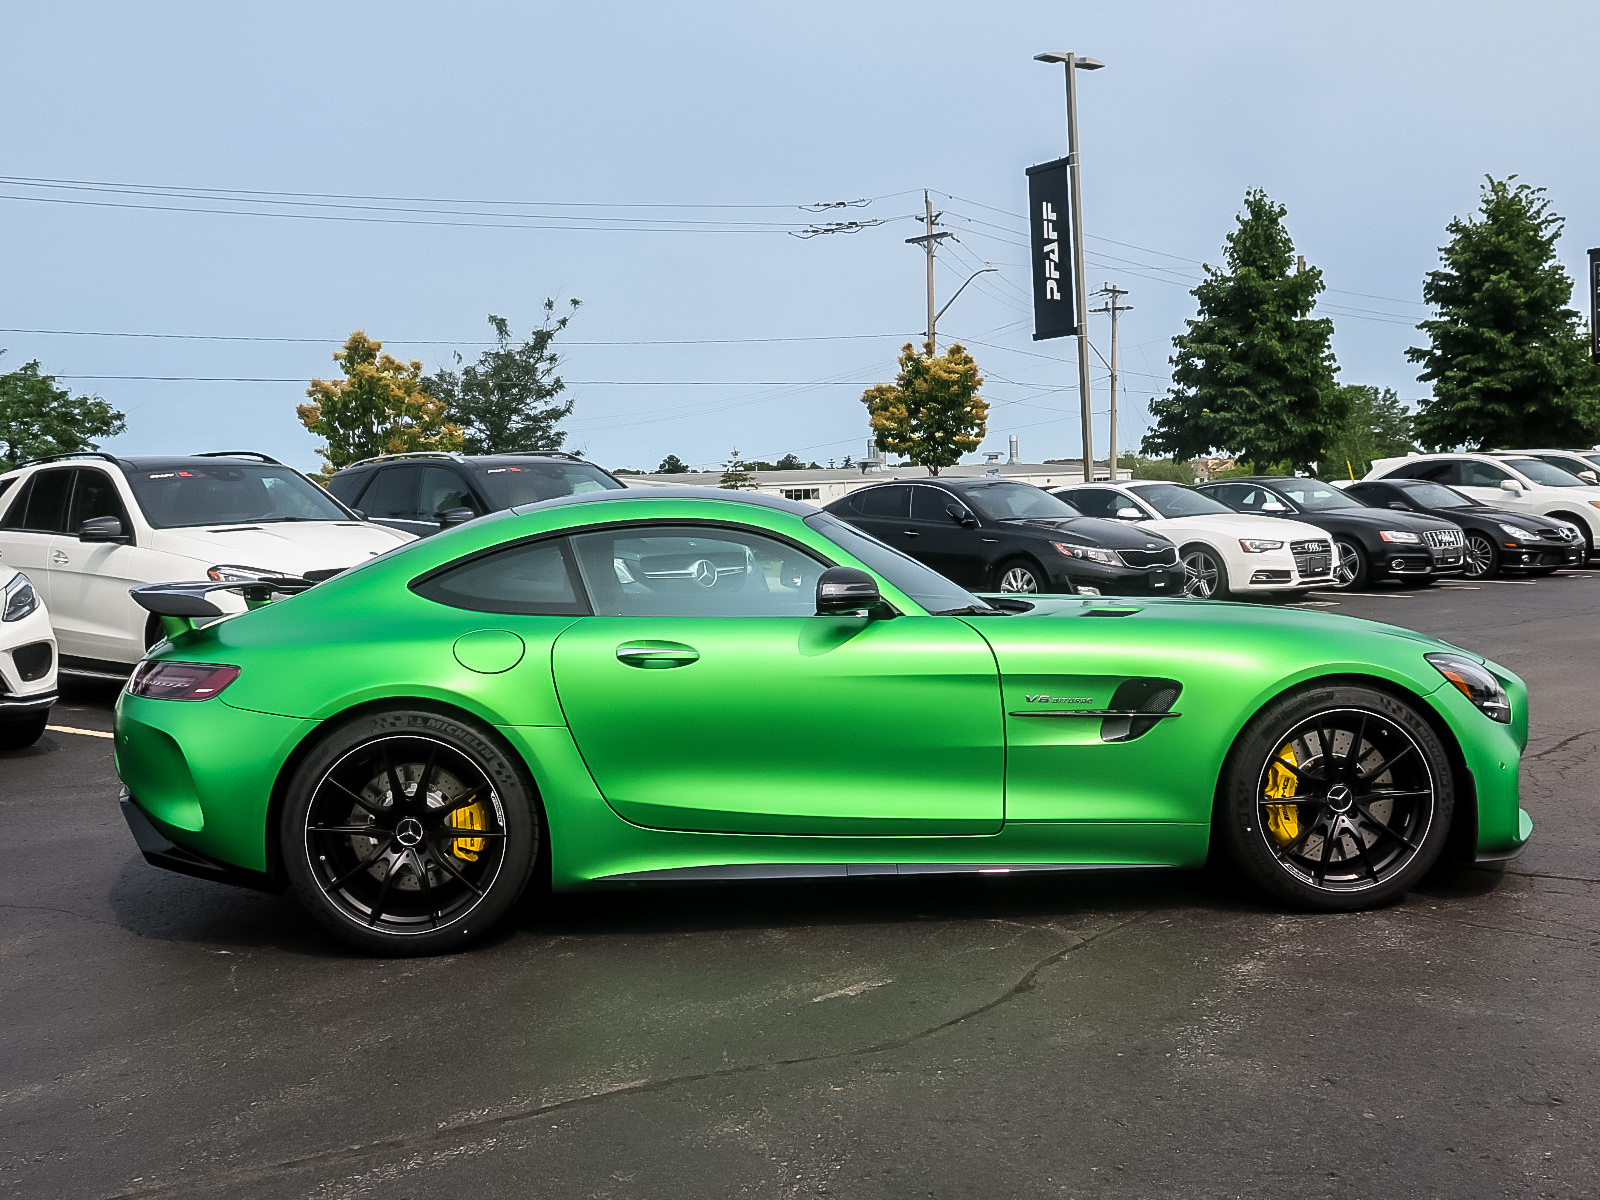 Mercedes Amg Gtr Pro Albumccars Cars Images Collection My XXX Hot Girl